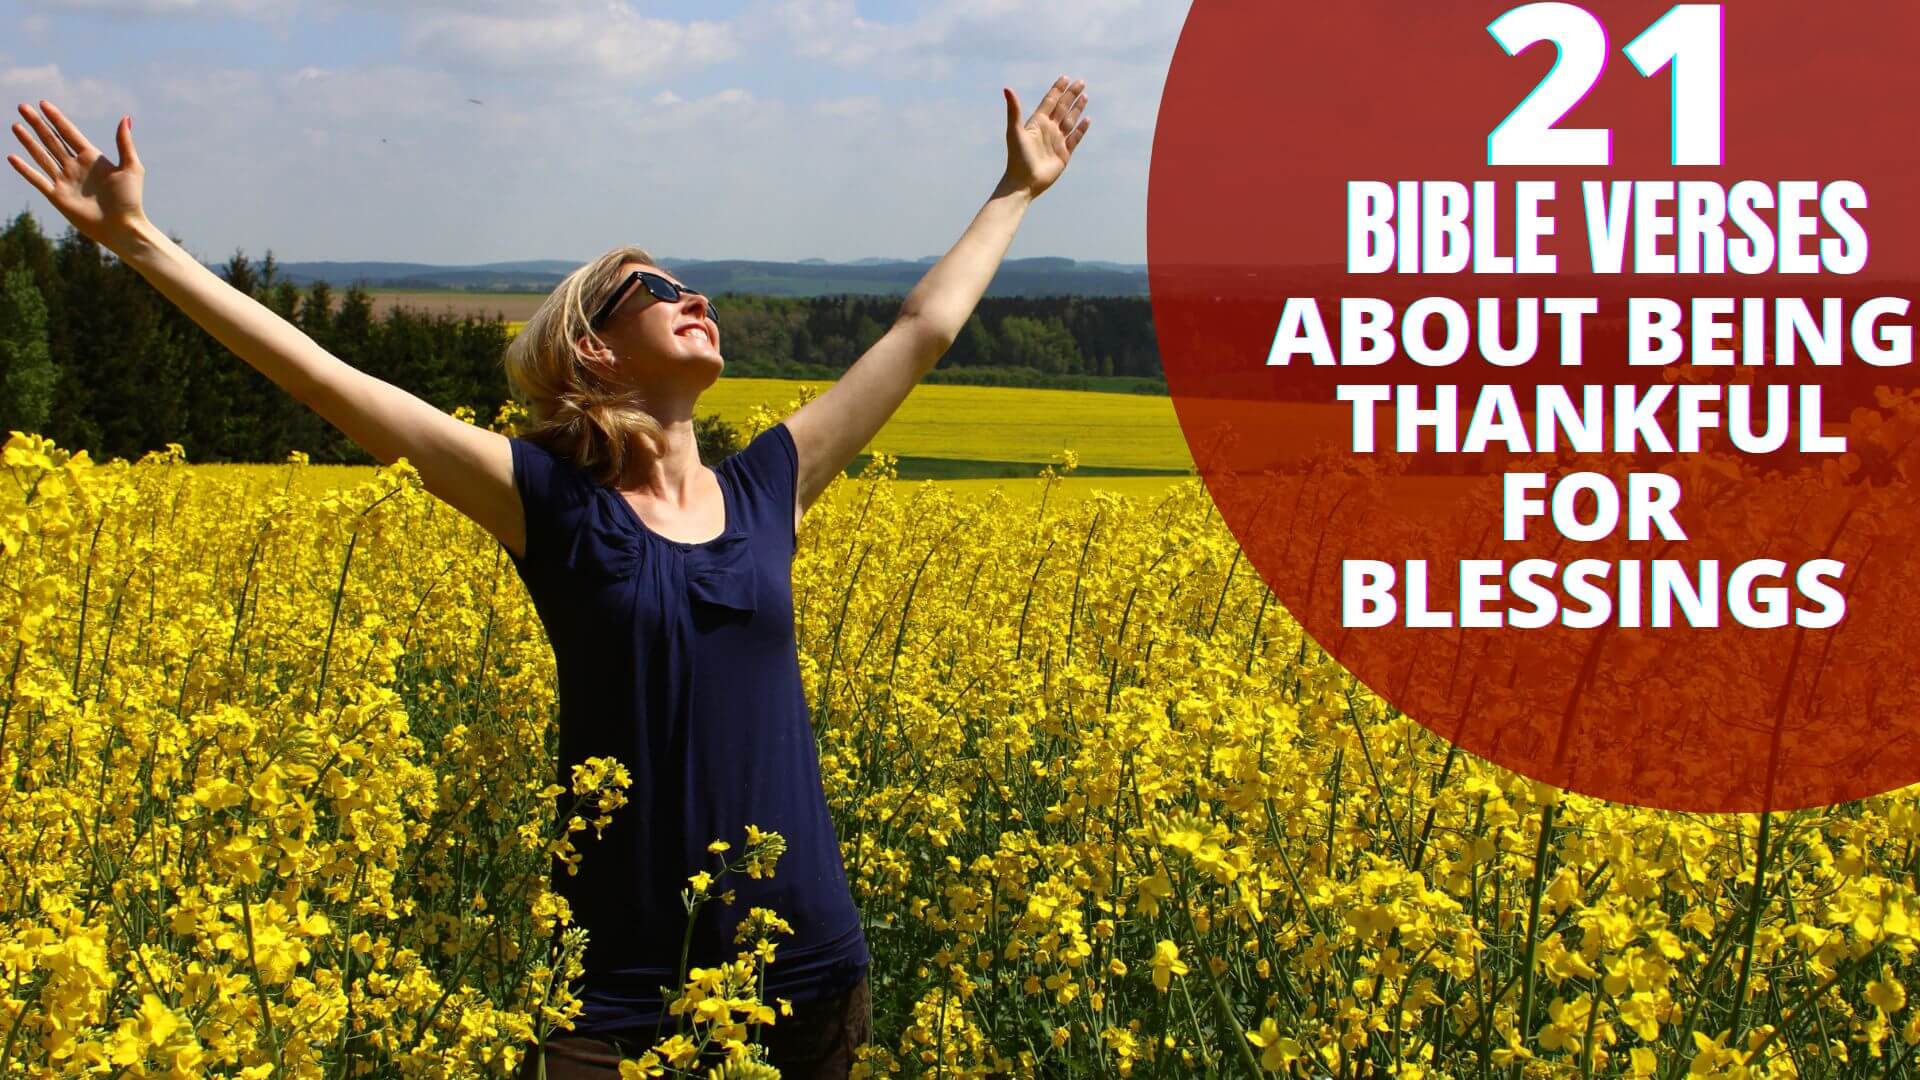 Bible Verses About Being Thankful For Blessings